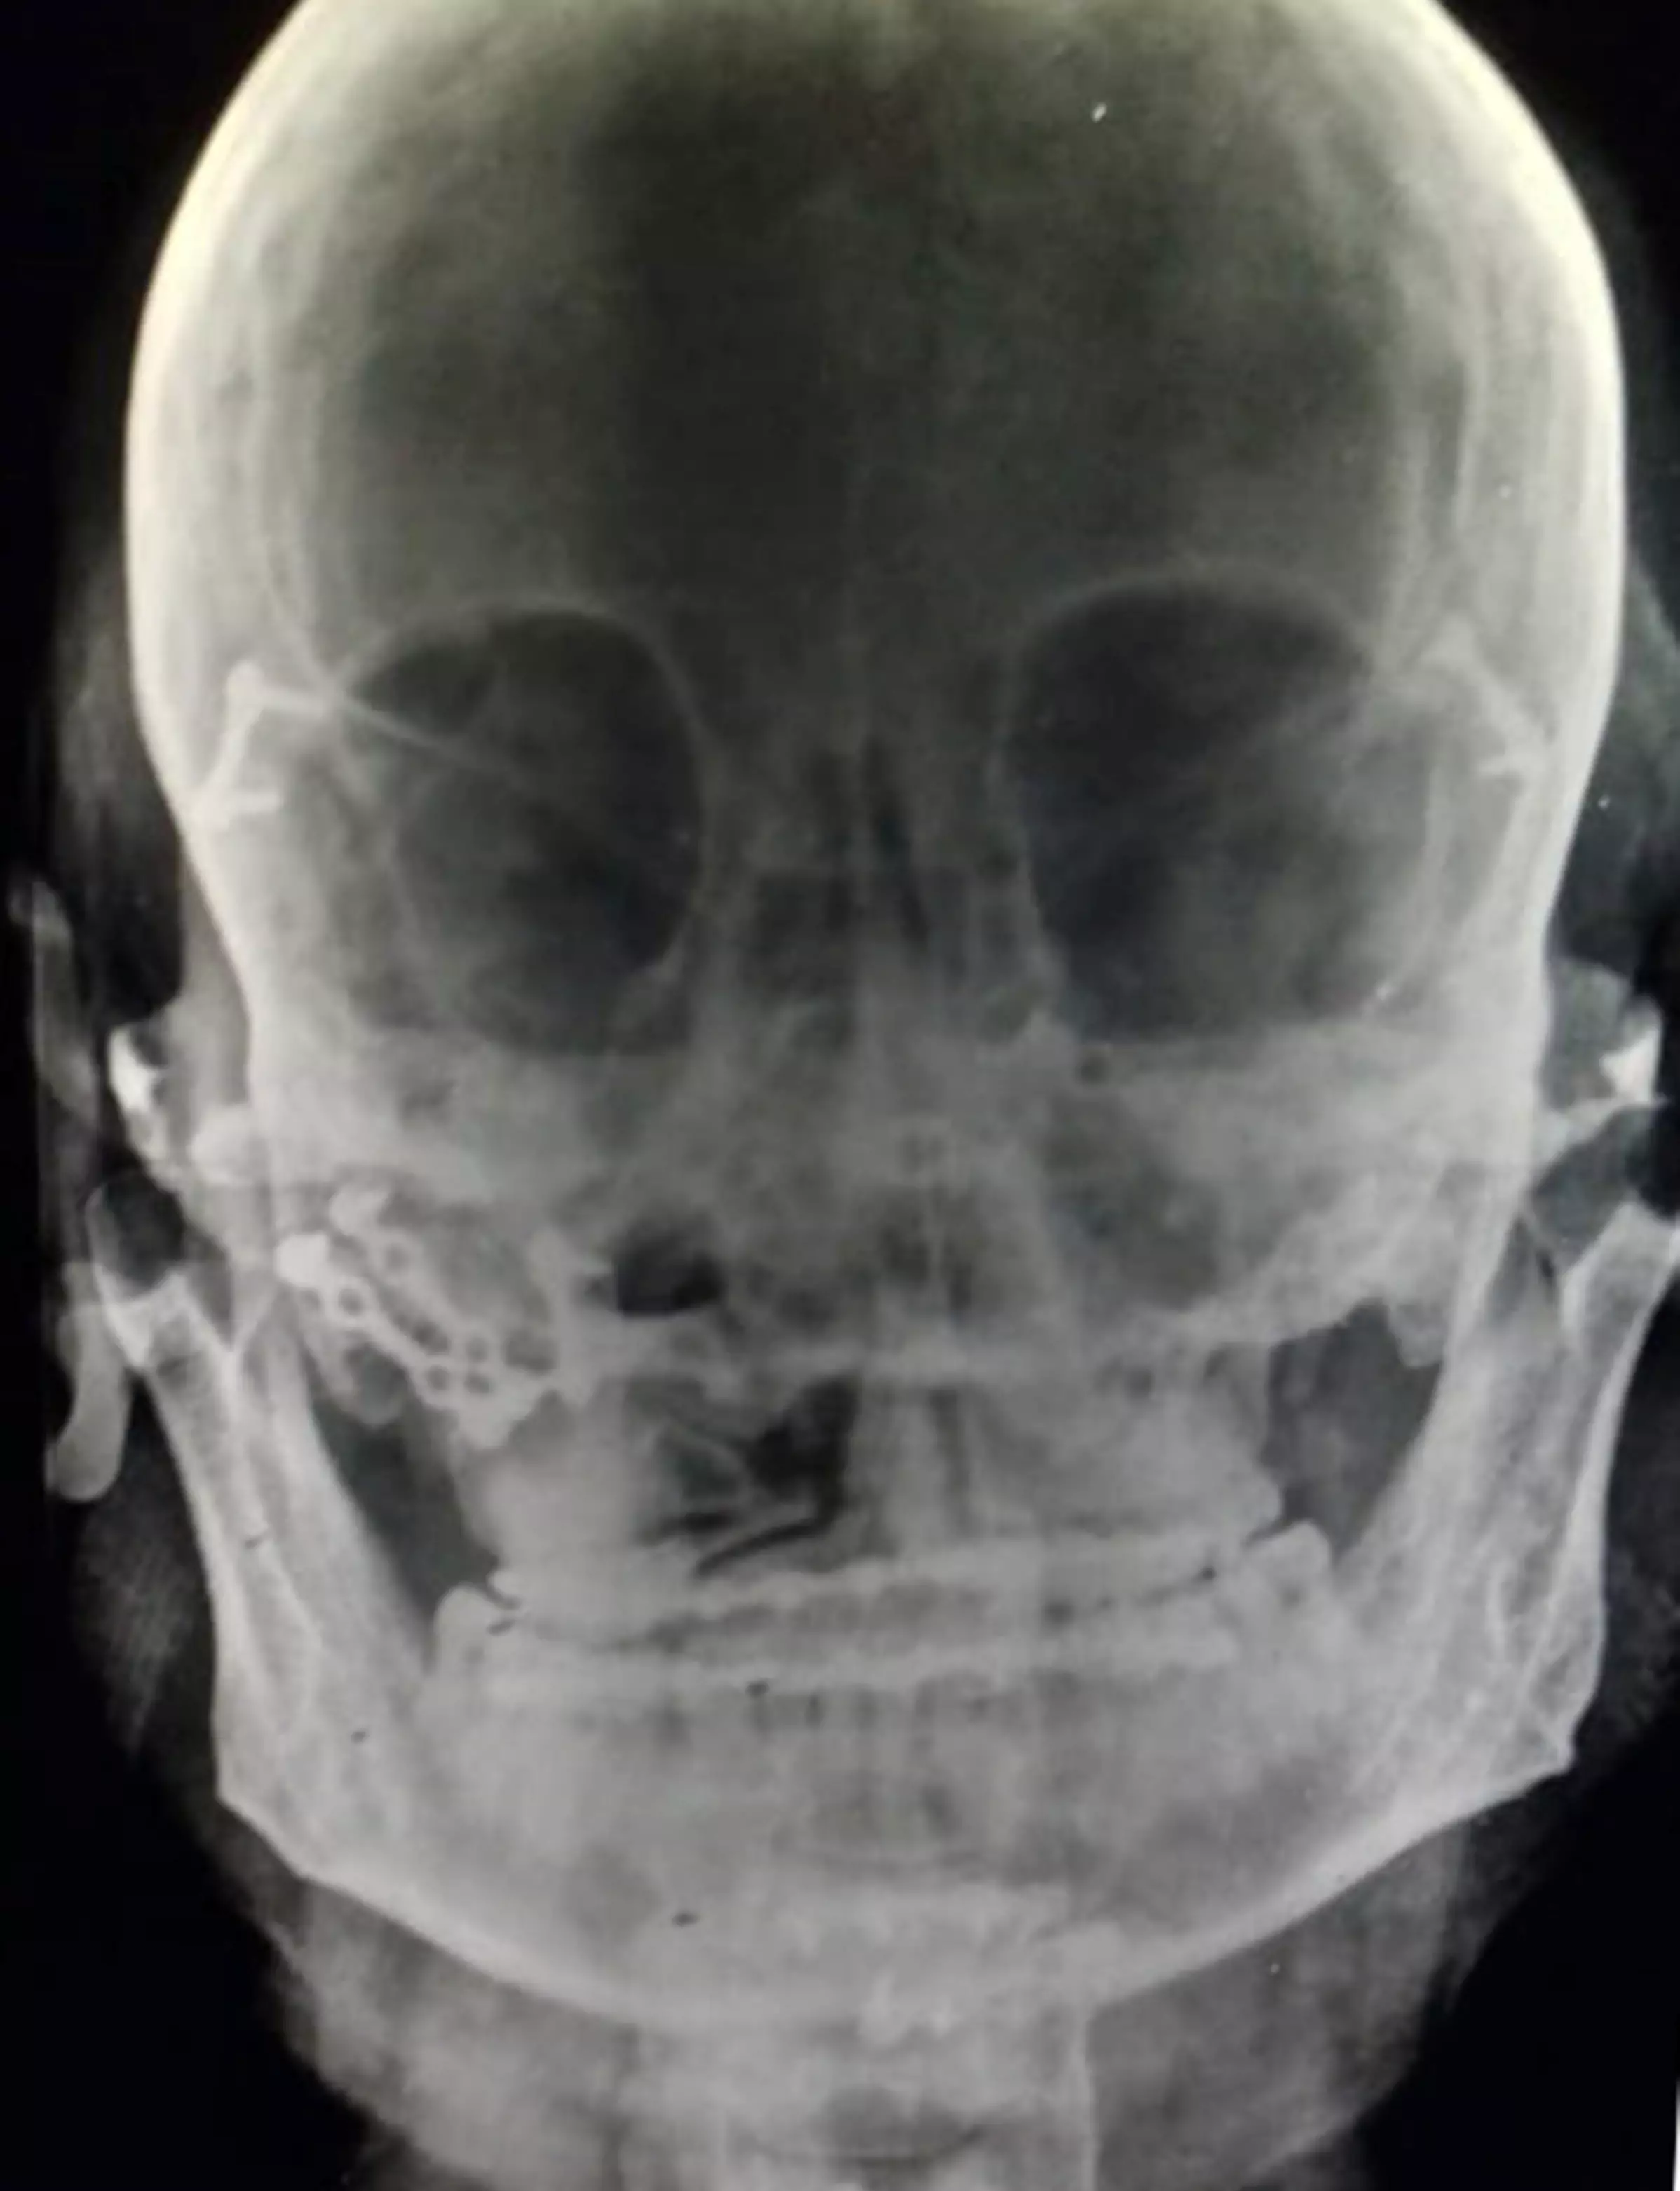 Here's an x-ray - you get the picture.